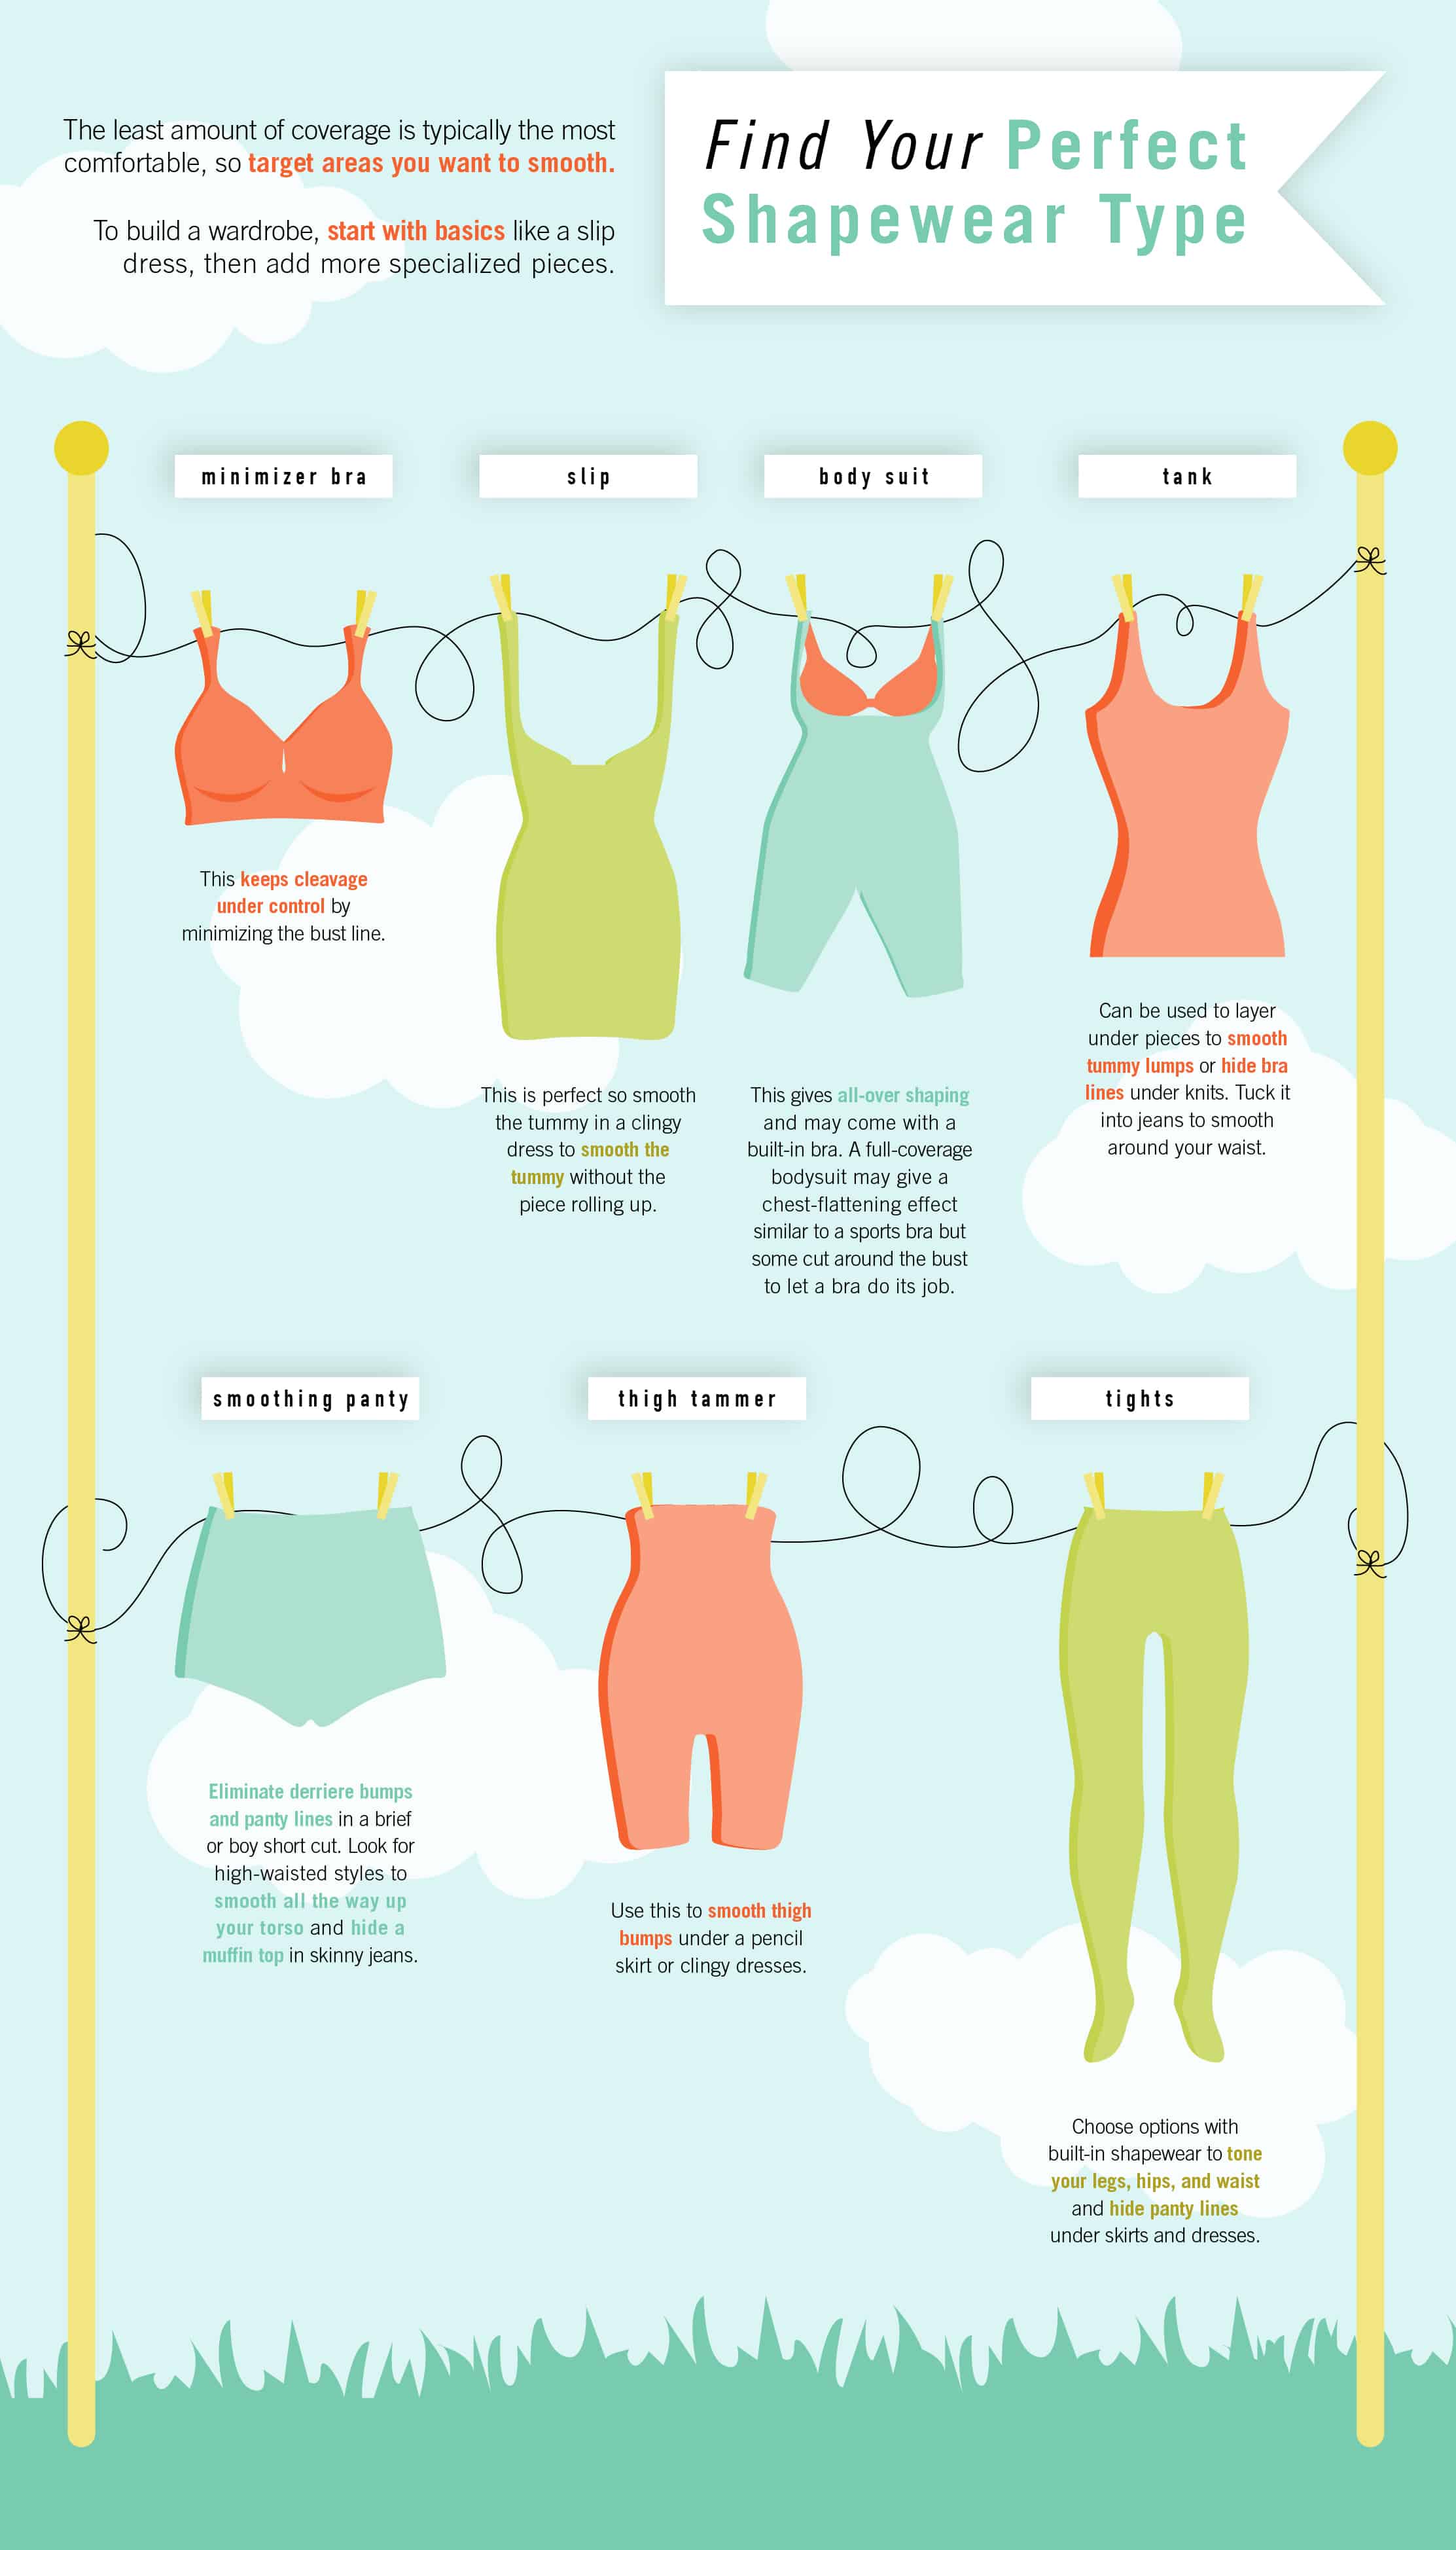 Shapewear Tips to Manage Your Assets